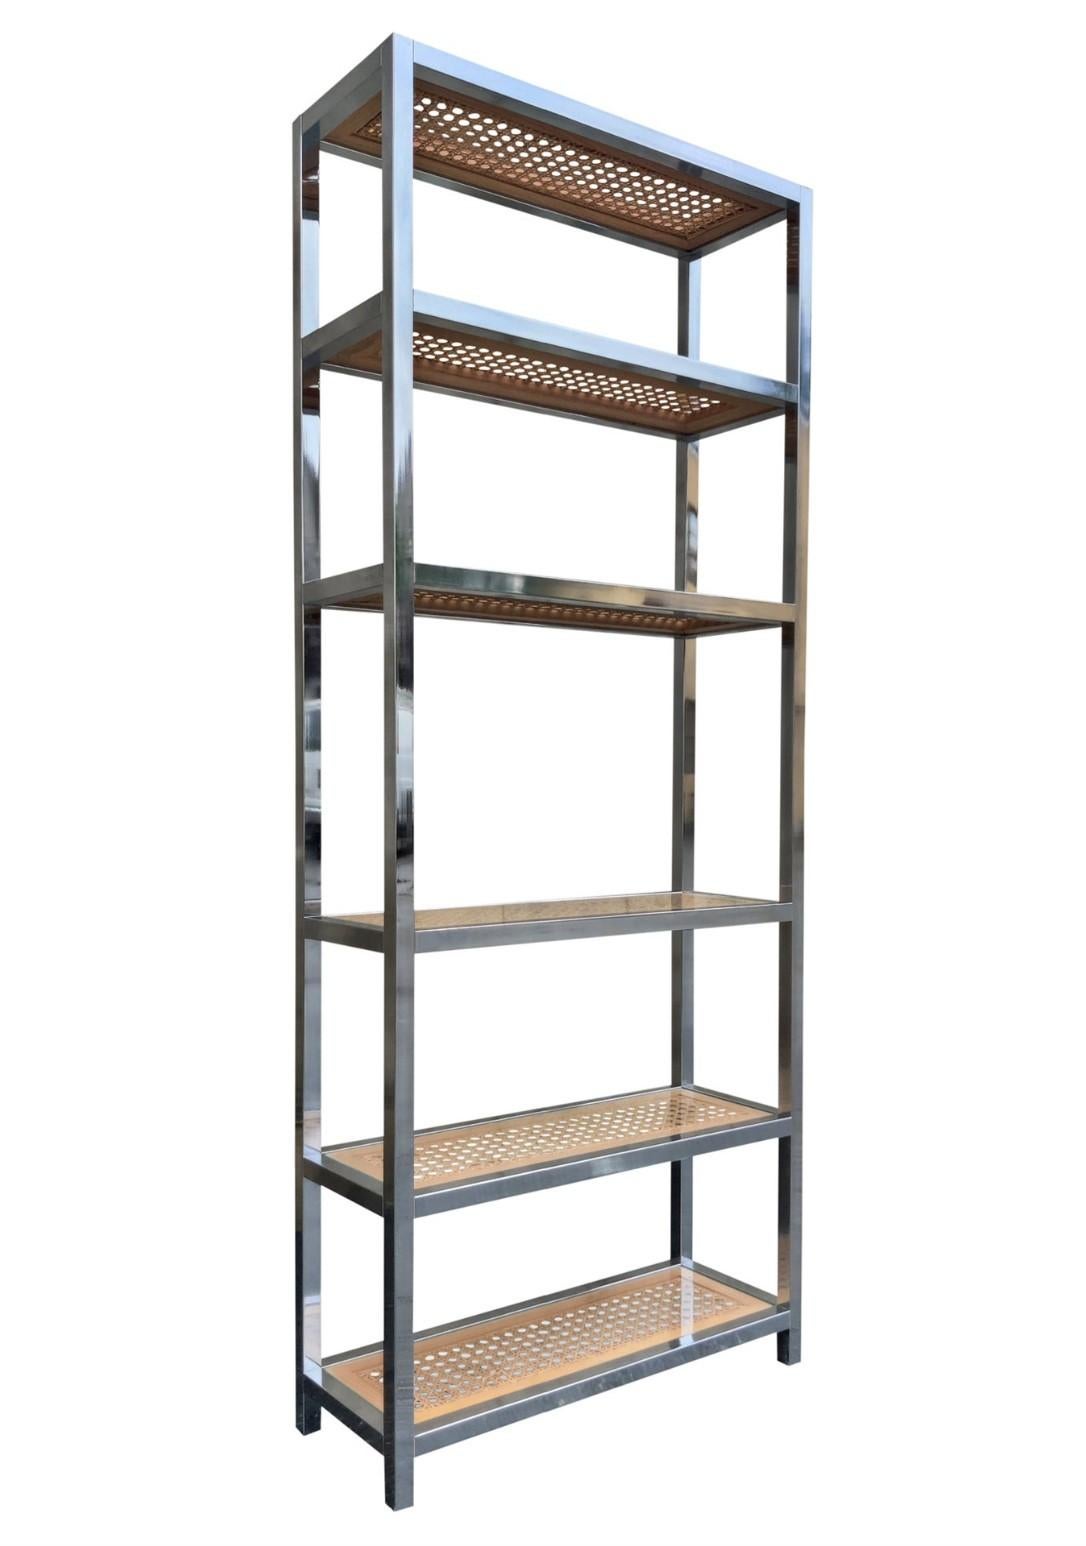 This tall, narrow, and elegant etagere was designed in the 1980s in the style of Gabriella Crespi or Milo Baughman, who is famous in part for his iconic etagere designs. This example is made of 1 1/4 inch thick chromed steel for the frame and has 6